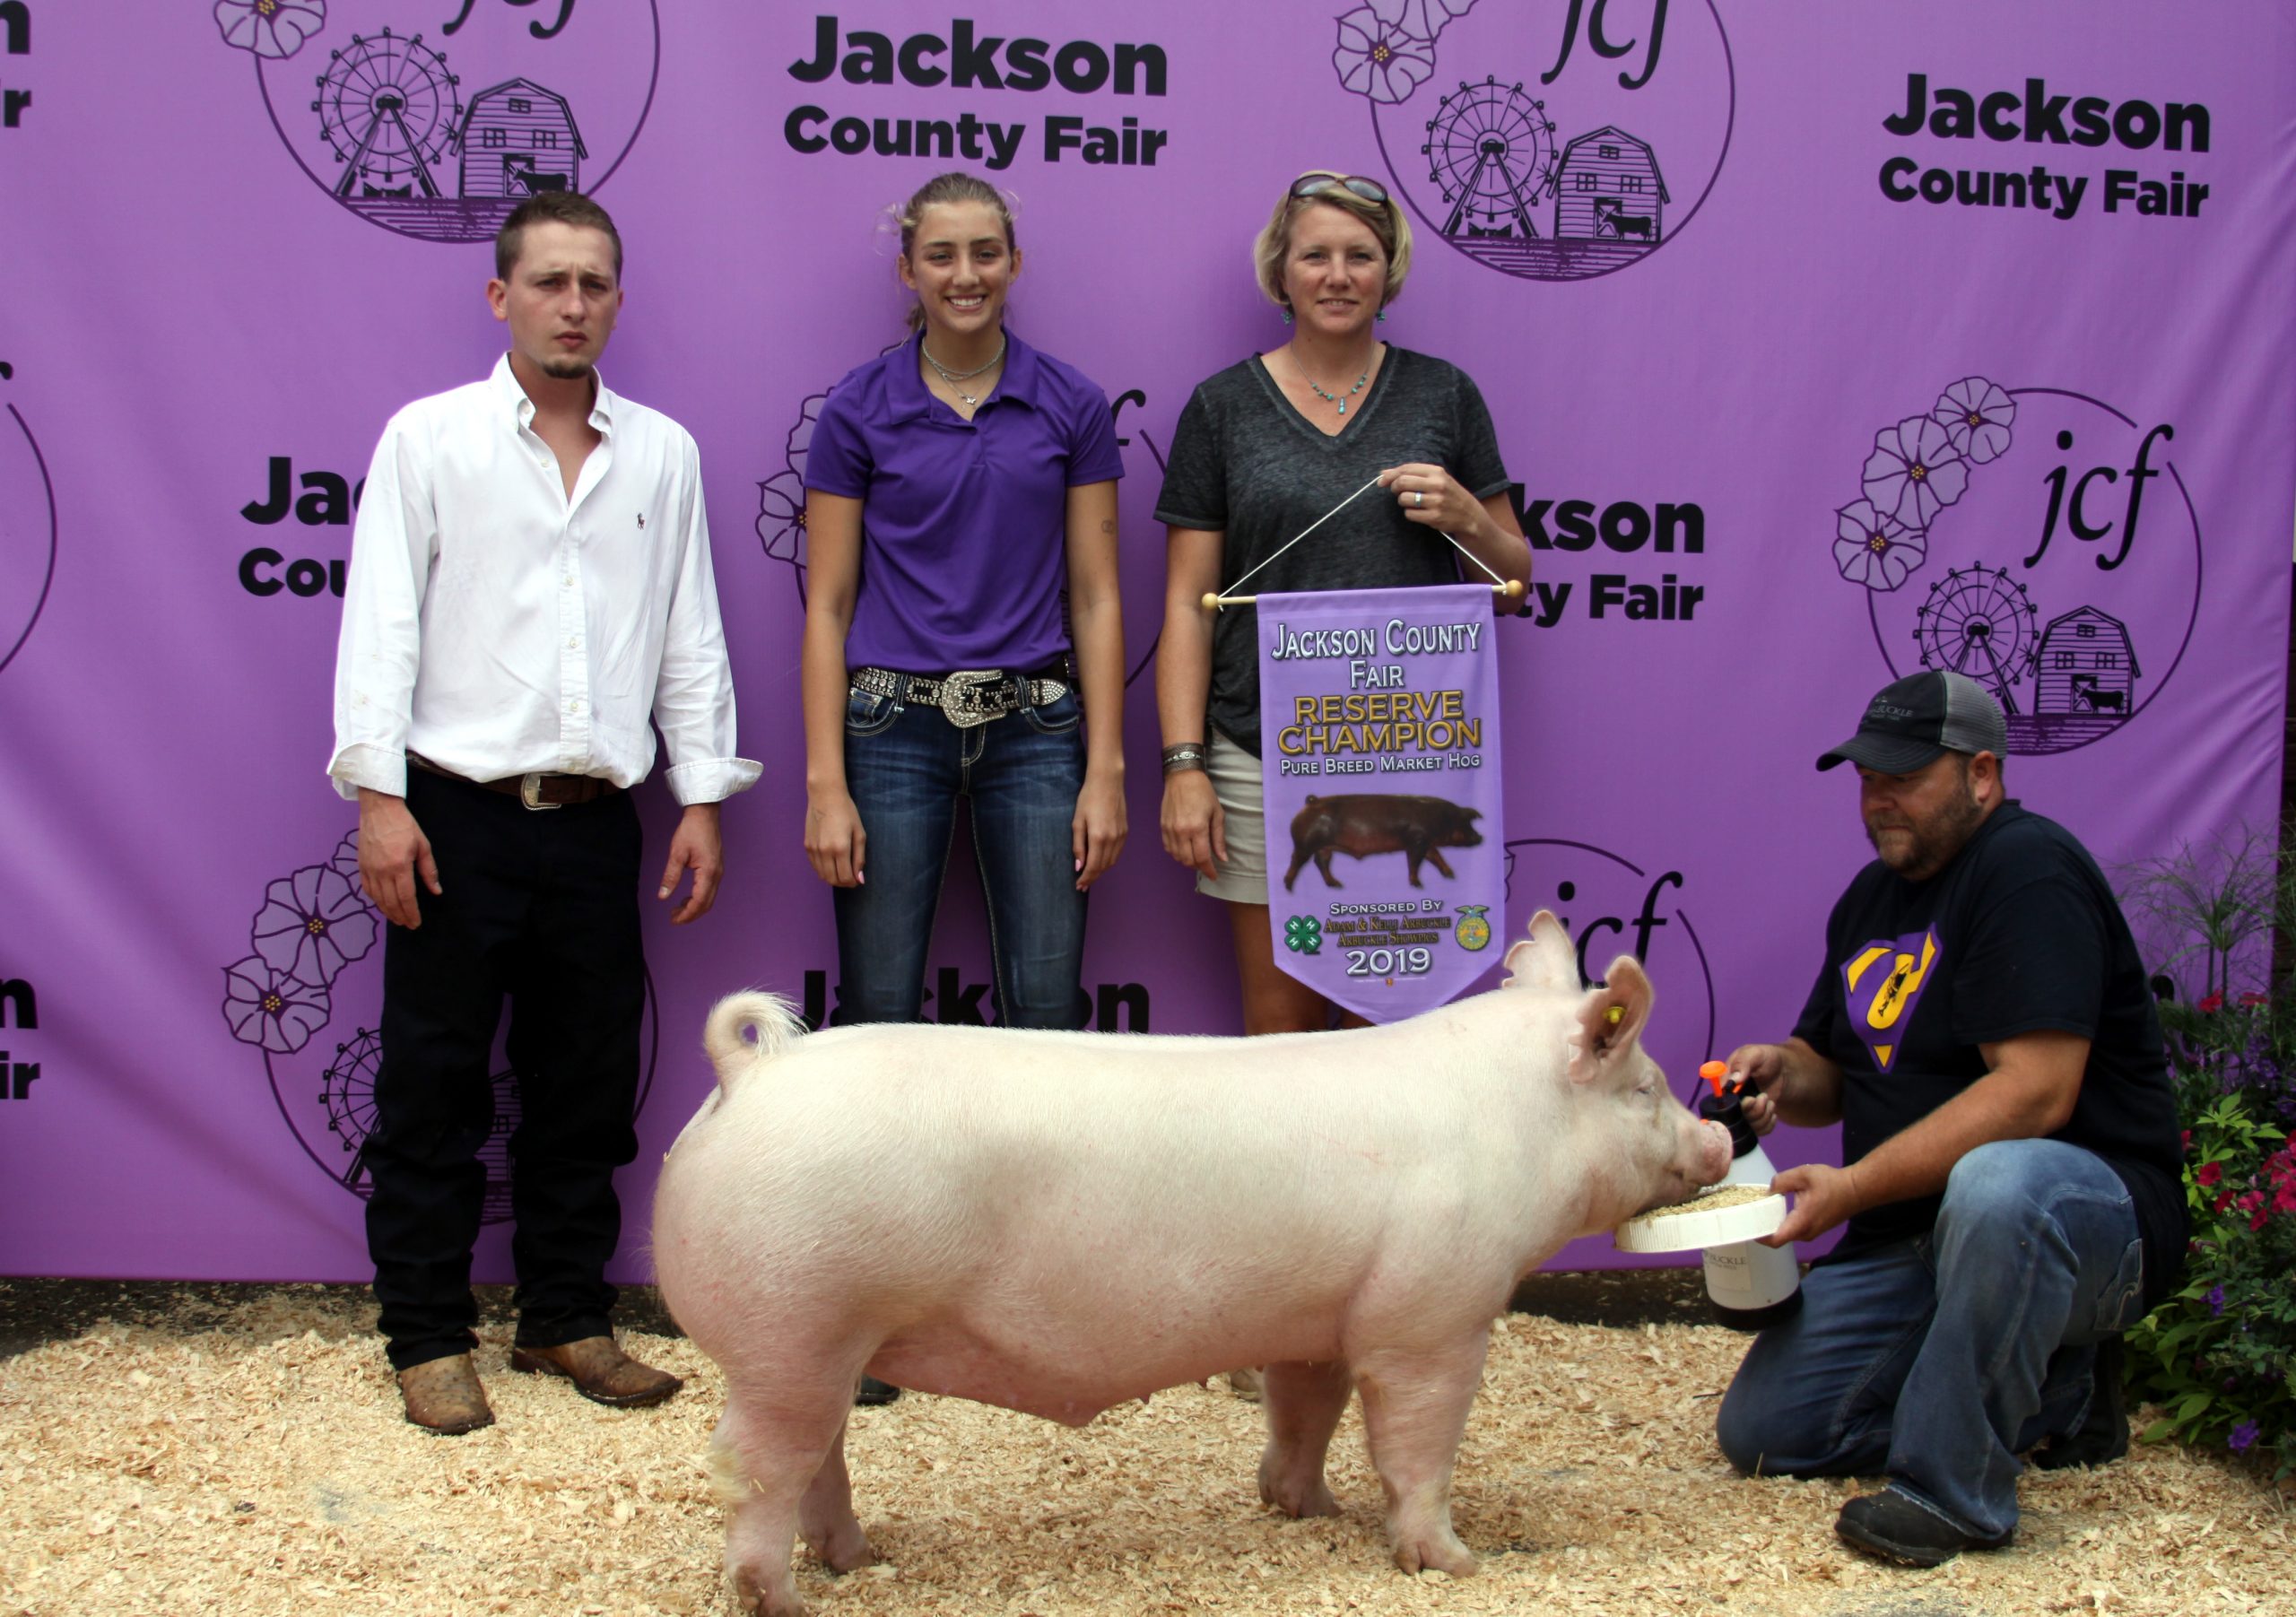 Jackson County Fair,Champion York, Reserve Champion Purebred, Sired by Hand It Over